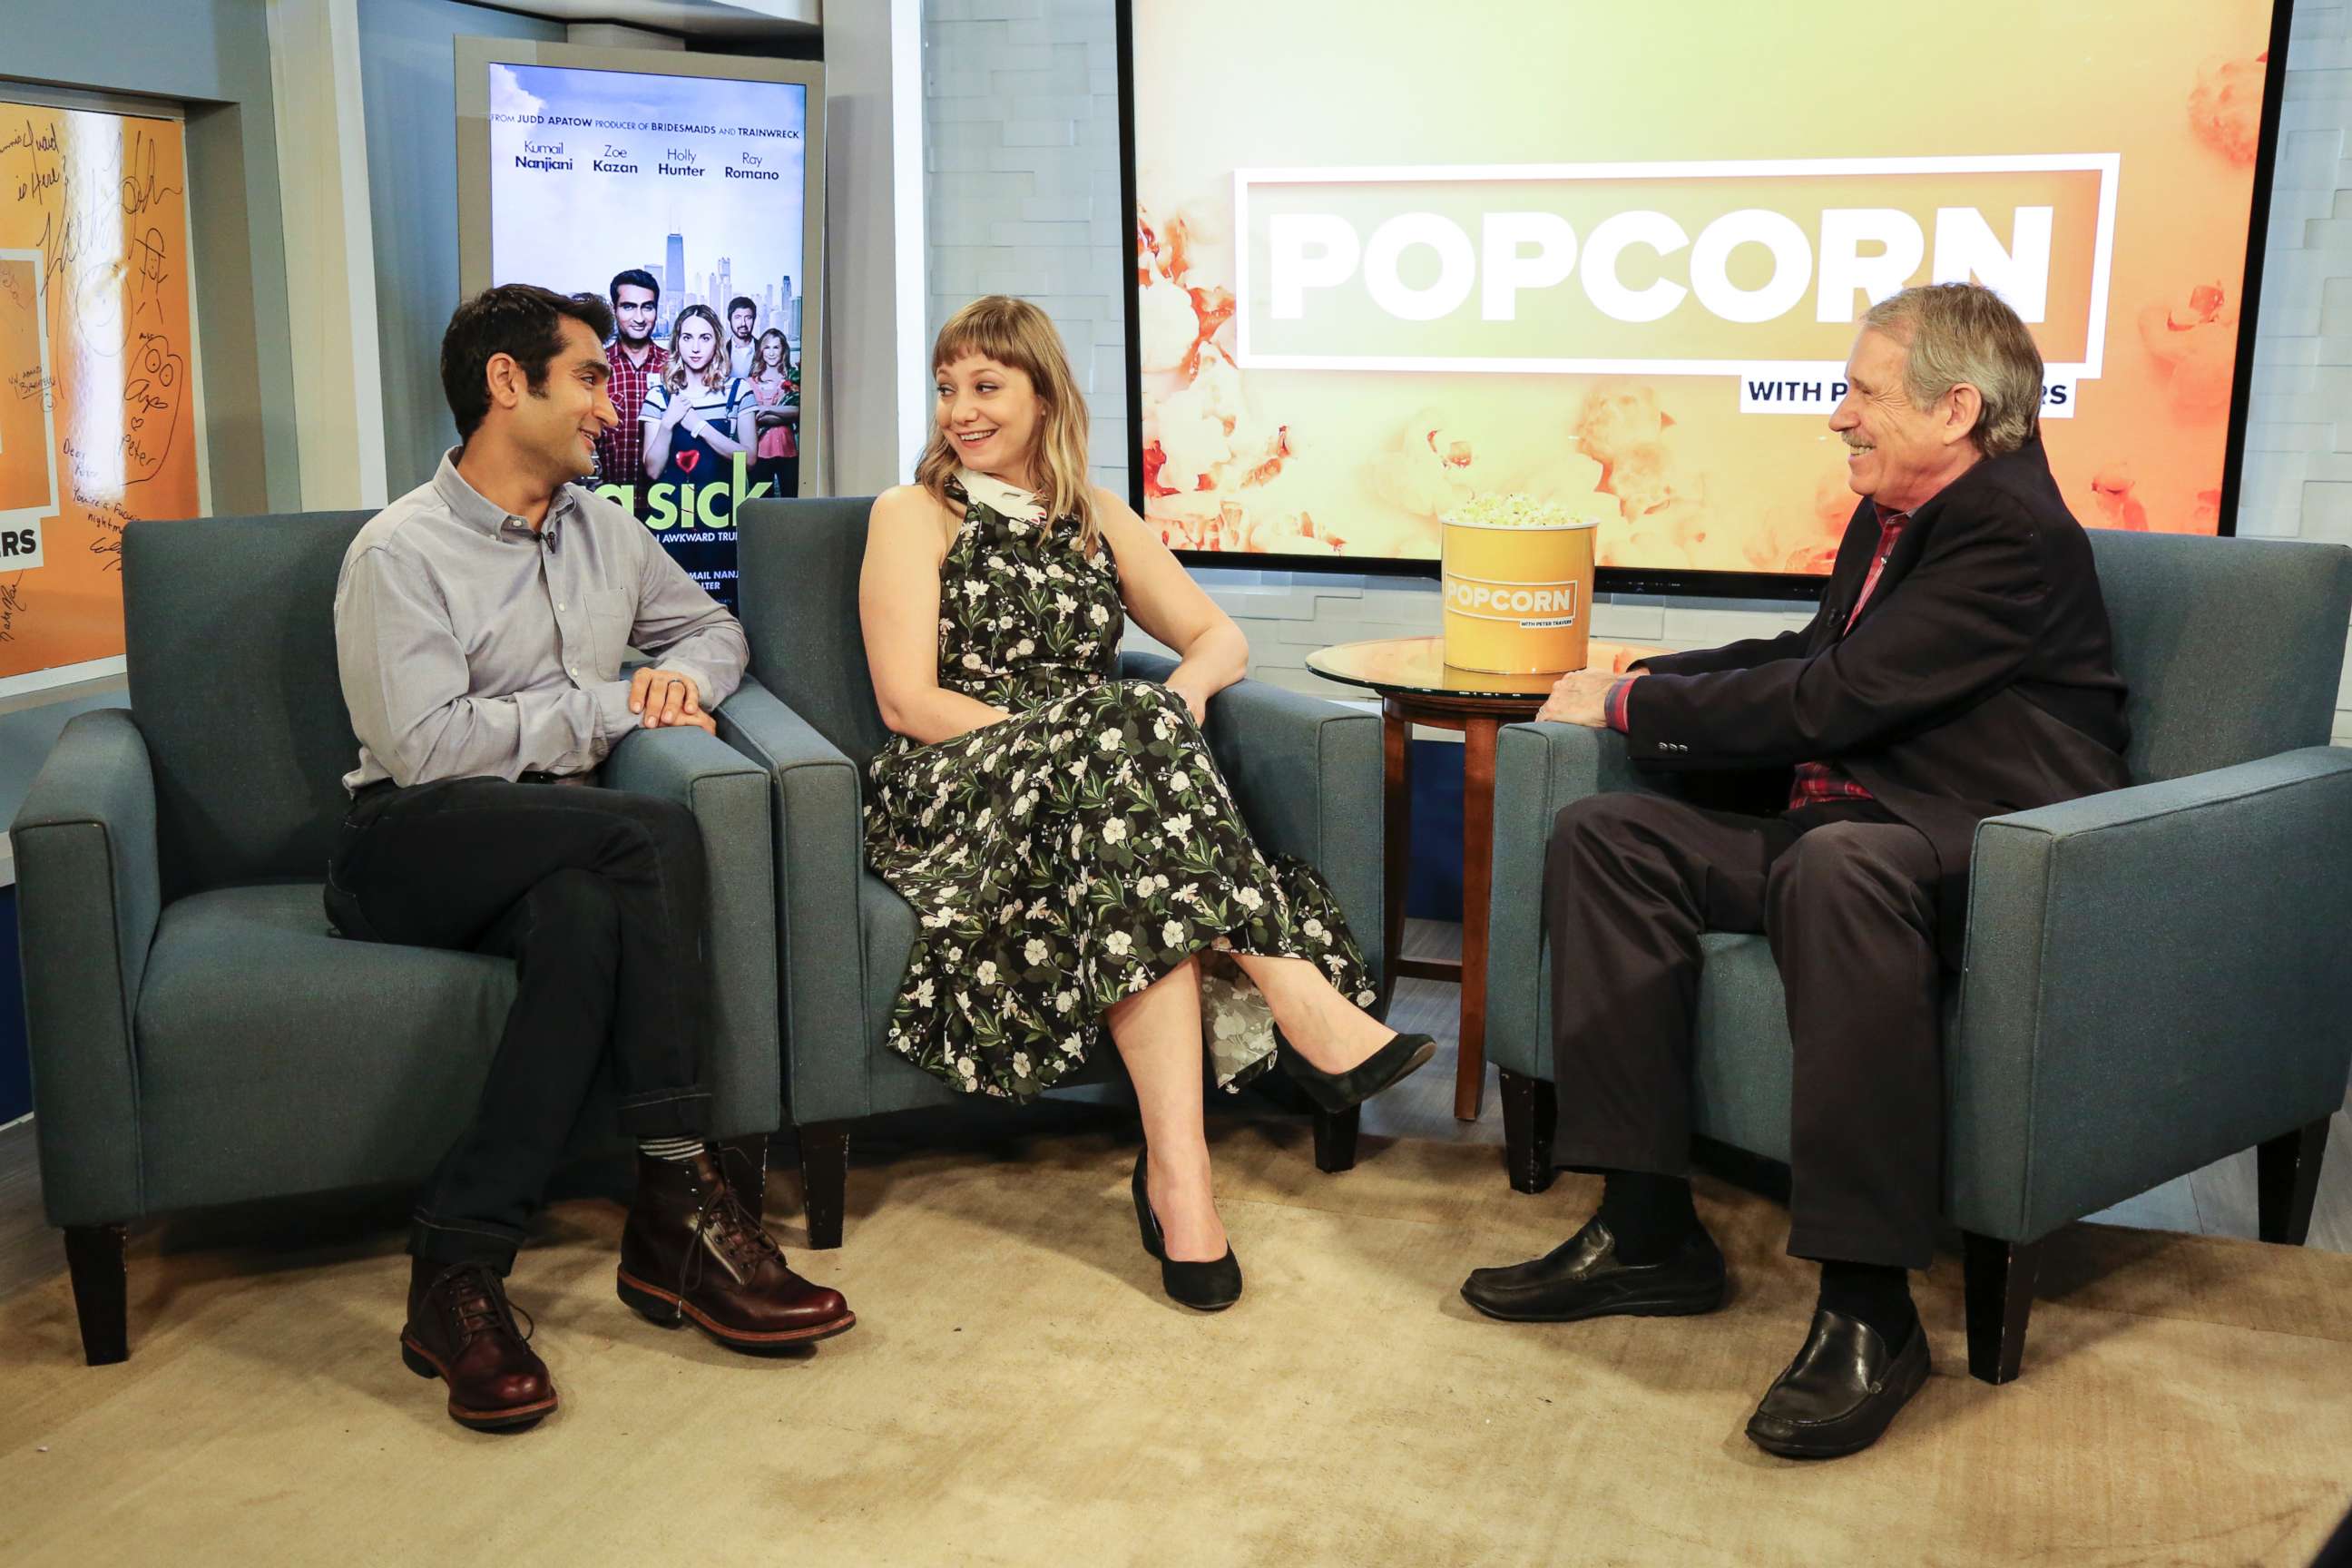 PHOTO: Kumail Nanjiani and Emily V. Gordon, from "The Big Sick," at the ABC News studios in New York City, on "Popcorn with Peter Travers," June 22, 2017.